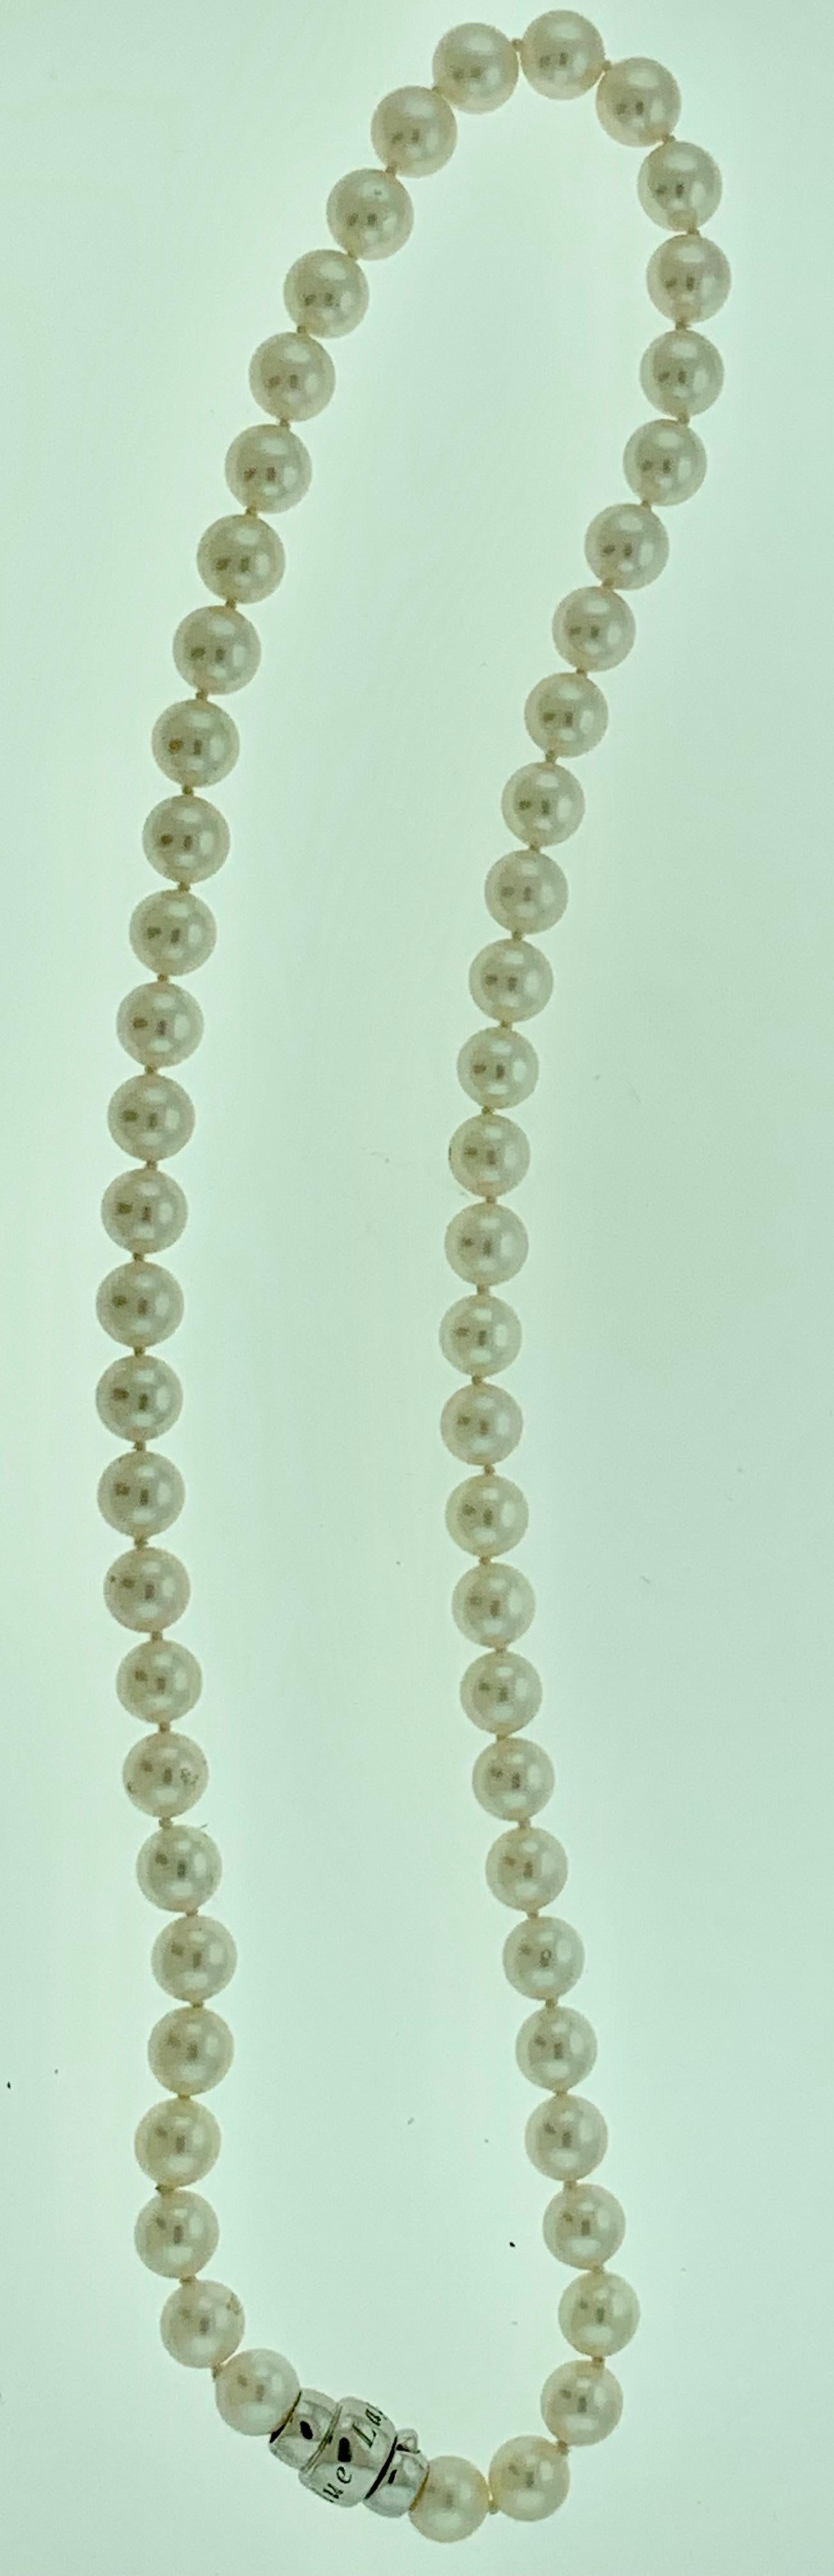 This marvelous vintage Mikimoto necklace features 1 row of luscious Blue Lagoon pearls (measuring approx. 7.25mm - 7.5mm) 
VINTAGE

PRE-OWNED 

ESTATE PIECE

100% NATURAL MIKIMOTO 18K White GOLD 




CLASP IS STAMPED 